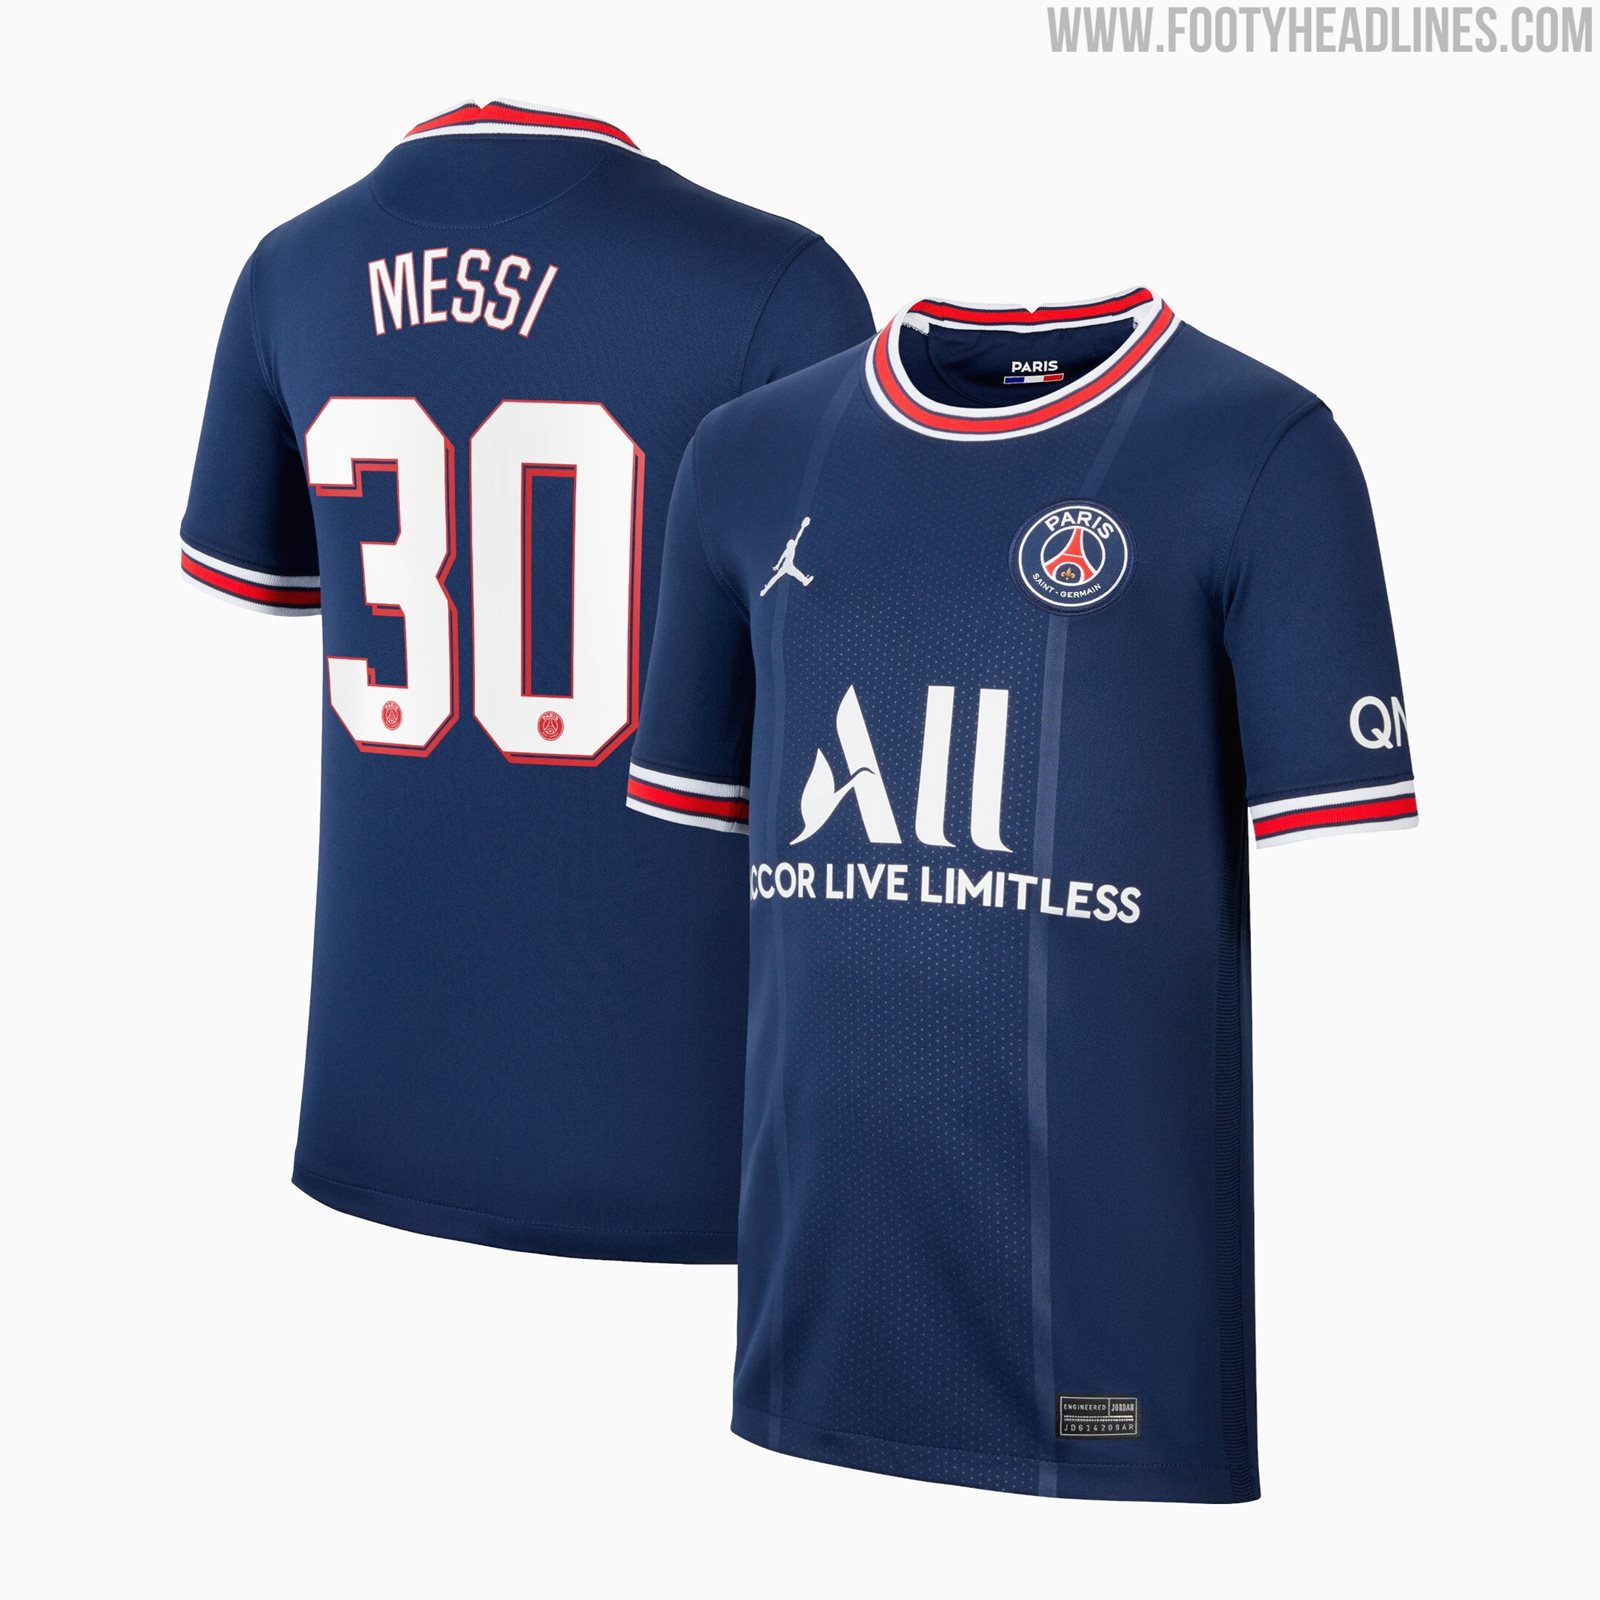 Messi Joins PSG - Will Wear No. 30 Shirt - Footy Headlines